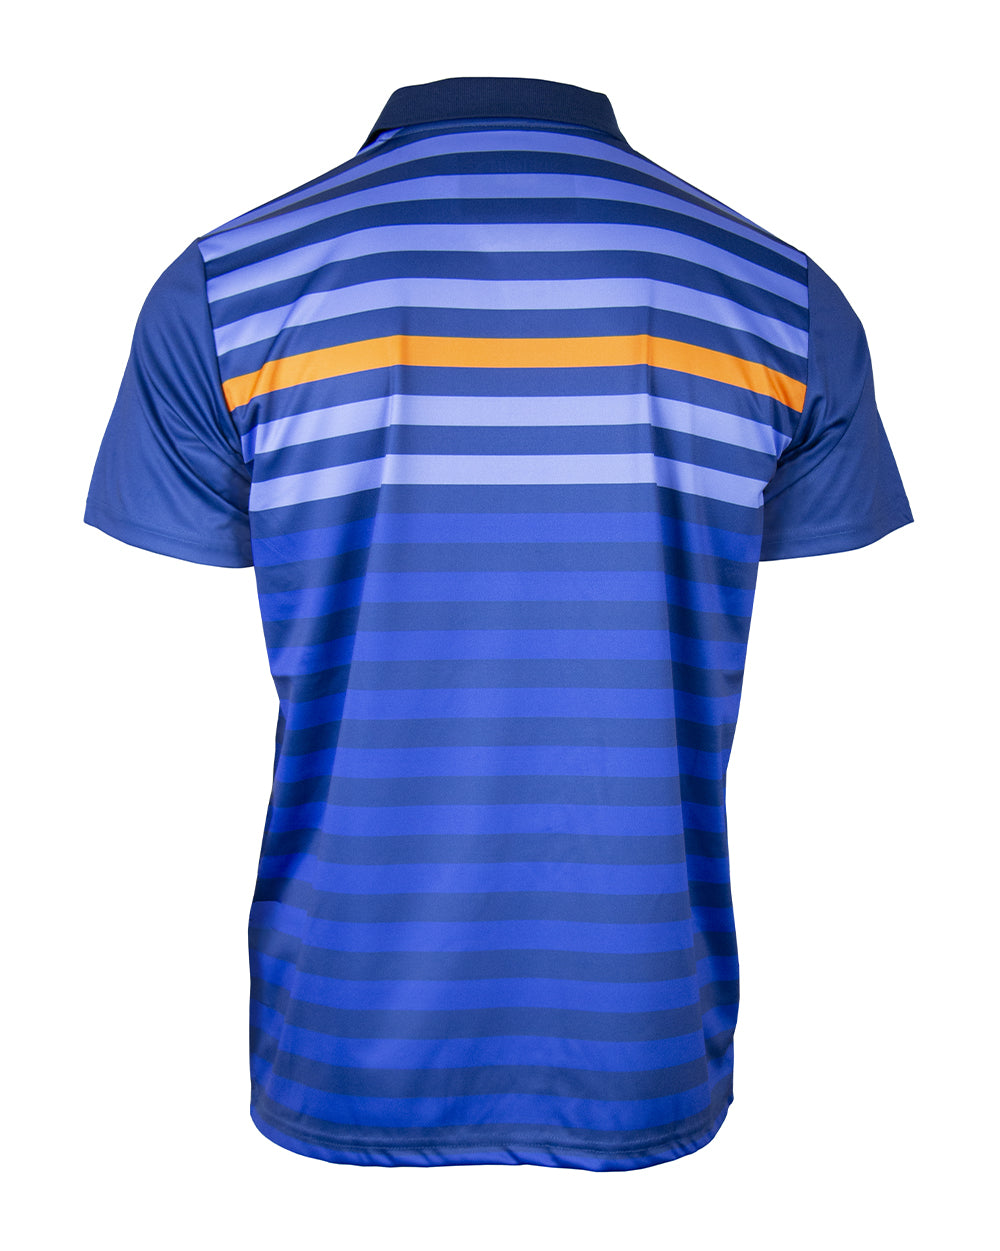 Speight's Striped Polo Shirt -  Beer Gear Apparel & Merchandise - Speights - Lion Red - VB - Tokyo Dy merch